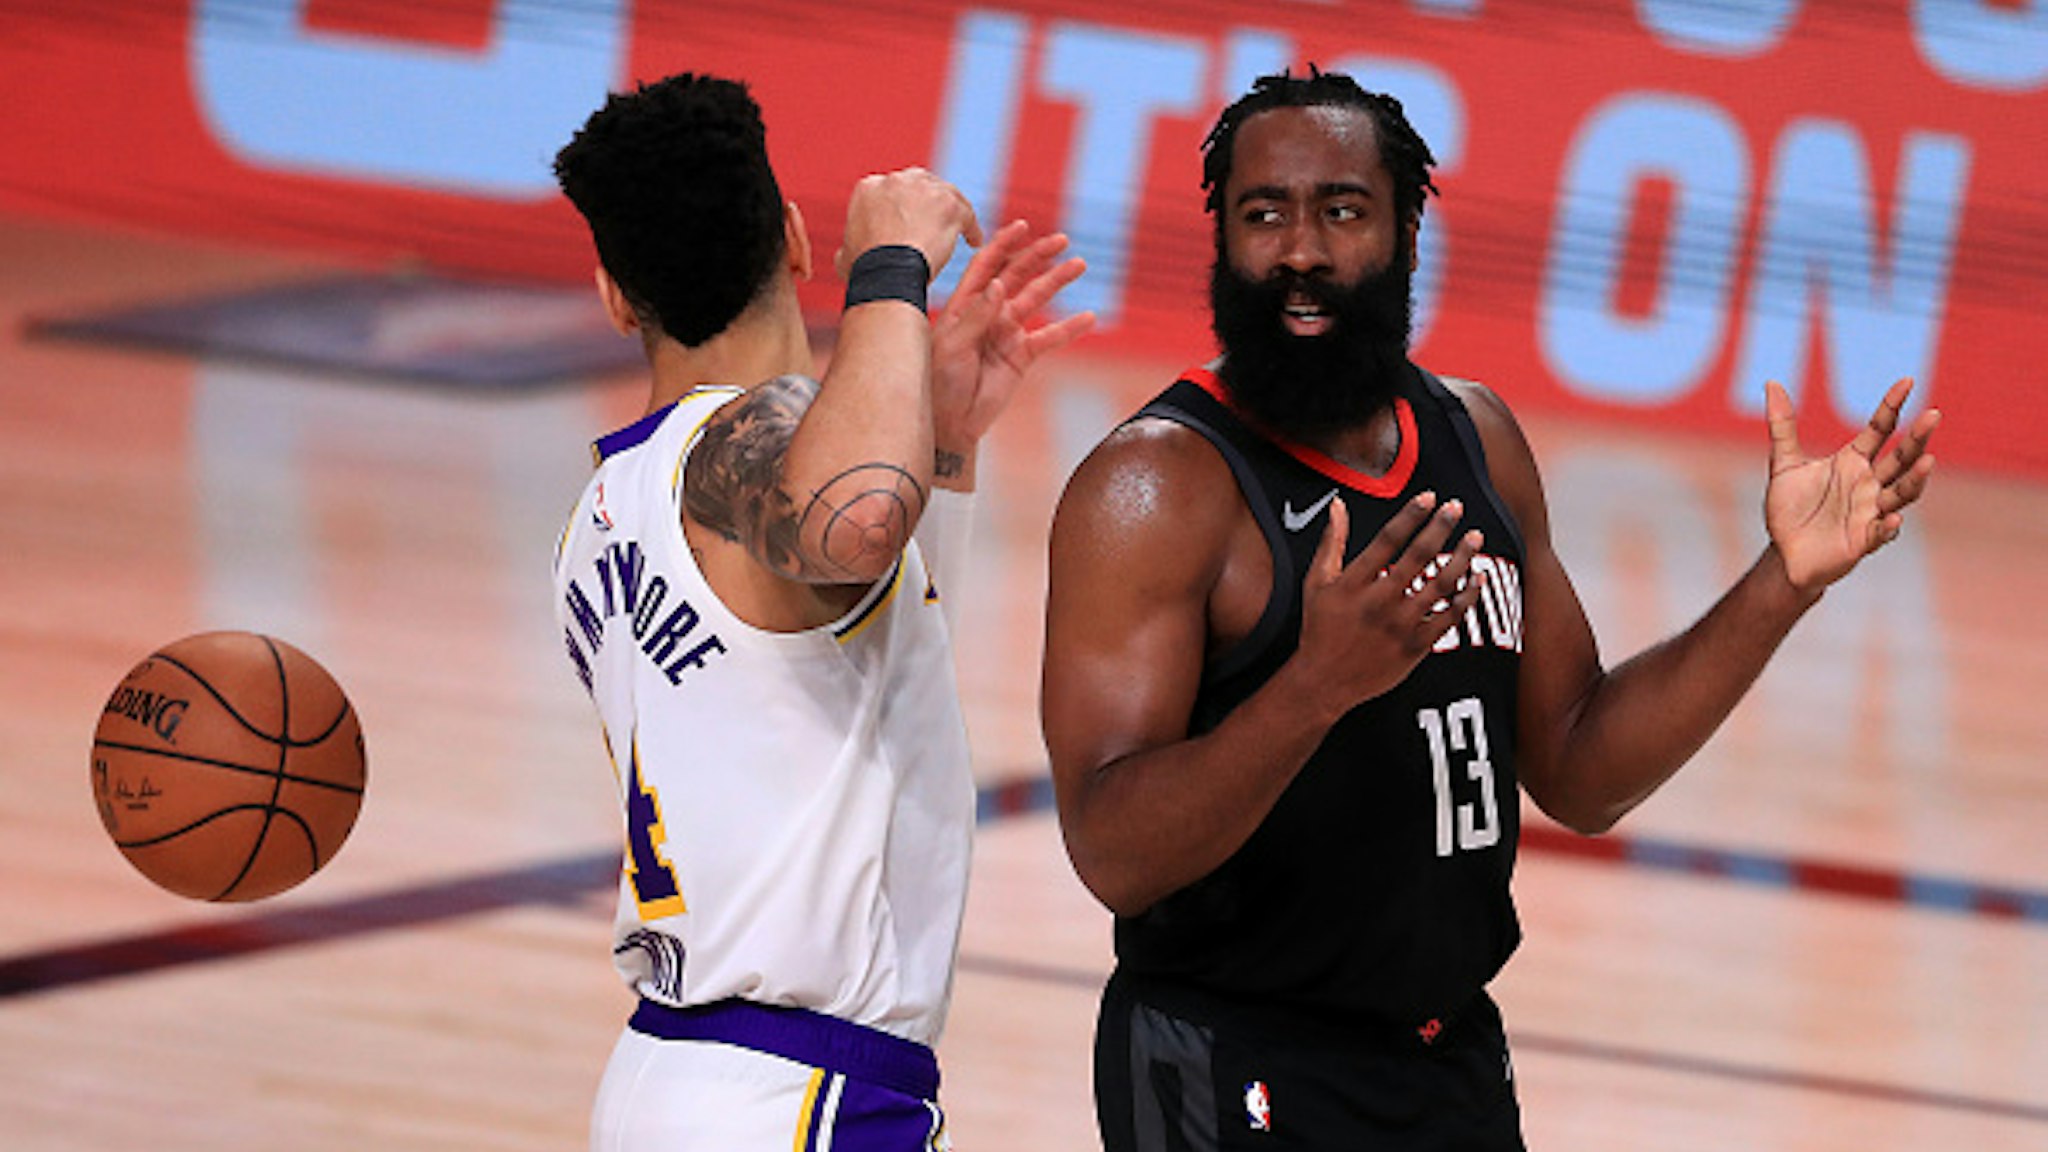 LAKE BUENA VISTA, FLORIDA - SEPTEMBER 12: James Harden #13 of the Houston Rockets reacts with Danny Green #14 of the Los Angeles Lakers during the third quarter in Game Five of the Western Conference Second Round during the 2020 NBA Playoffs at AdventHealth Arena at the ESPN Wide World Of Sports Complex on September 12, 2020 in Lake Buena Vista, Florida. NOTE TO USER: User expressly acknowledges and agrees that, by downloading and or using this photograph, User is consenting to the terms and conditions of the Getty Images License Agreement.